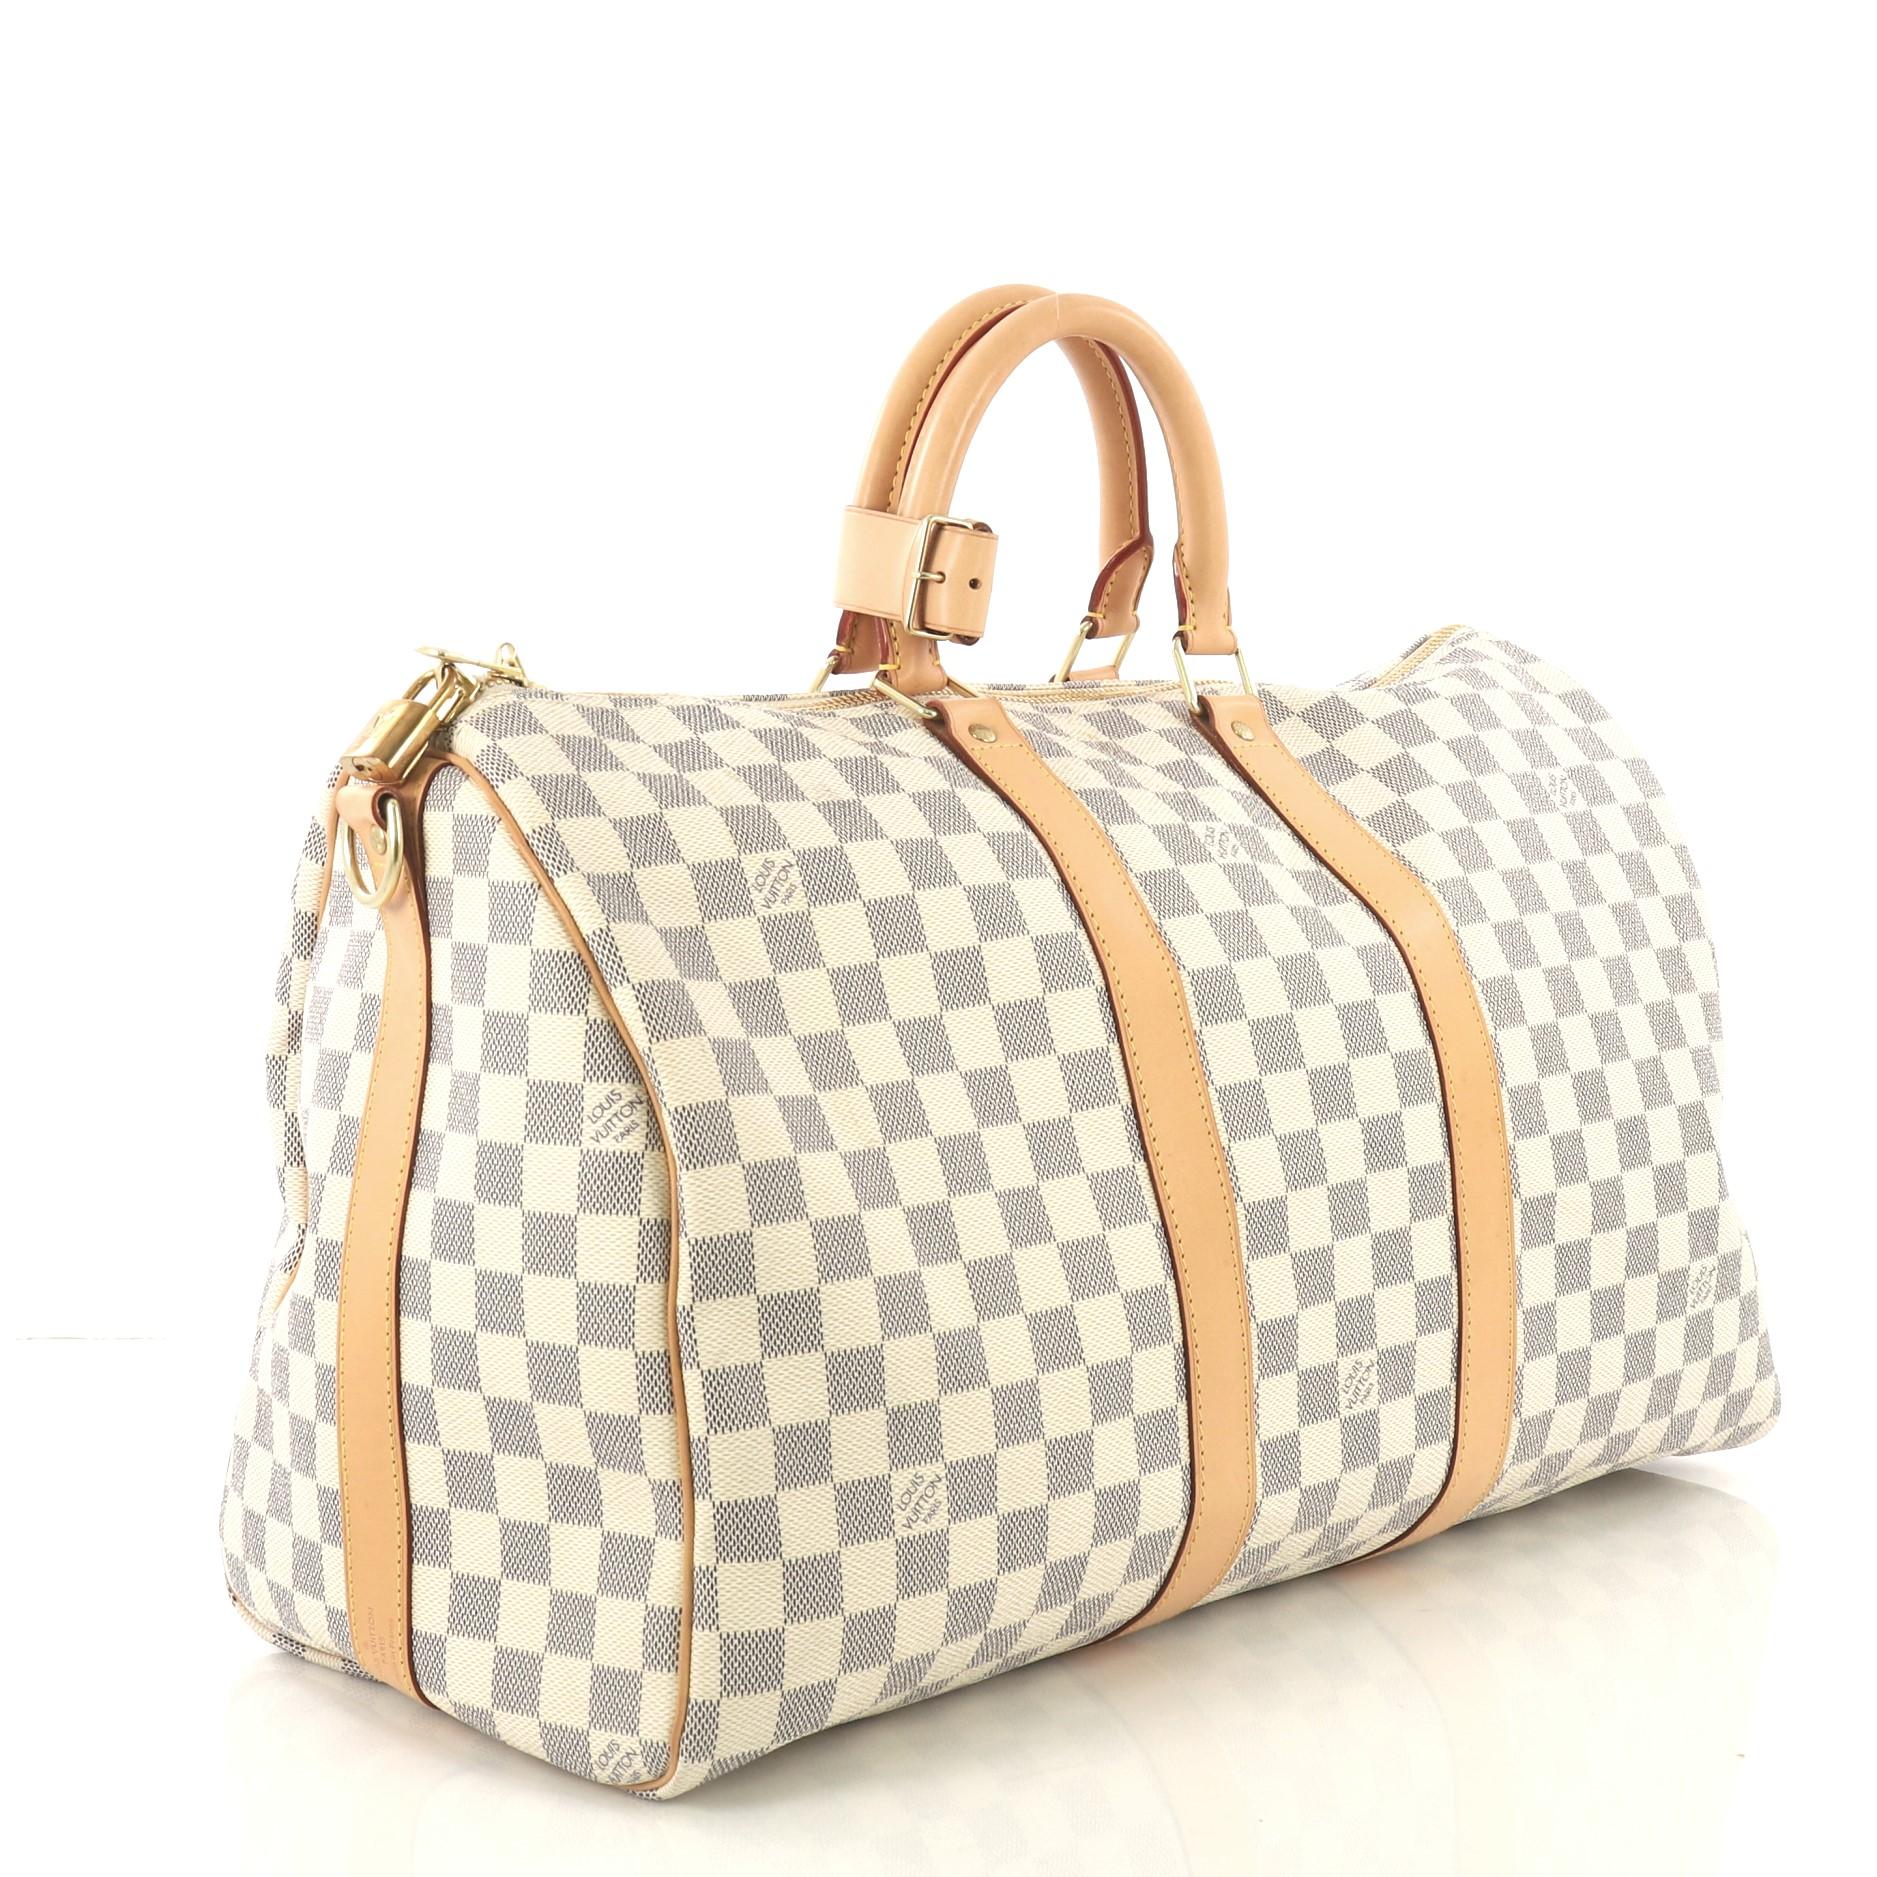 This Louis Vuitton Keepall Bandouliere Bag Damier 45, crafted from damier azur coated canvas, features dual rolled handles, vachetta leather trim, and gold-tone hardware. Its two-way top zip closure opens to a beige fabric interior. Authenticity